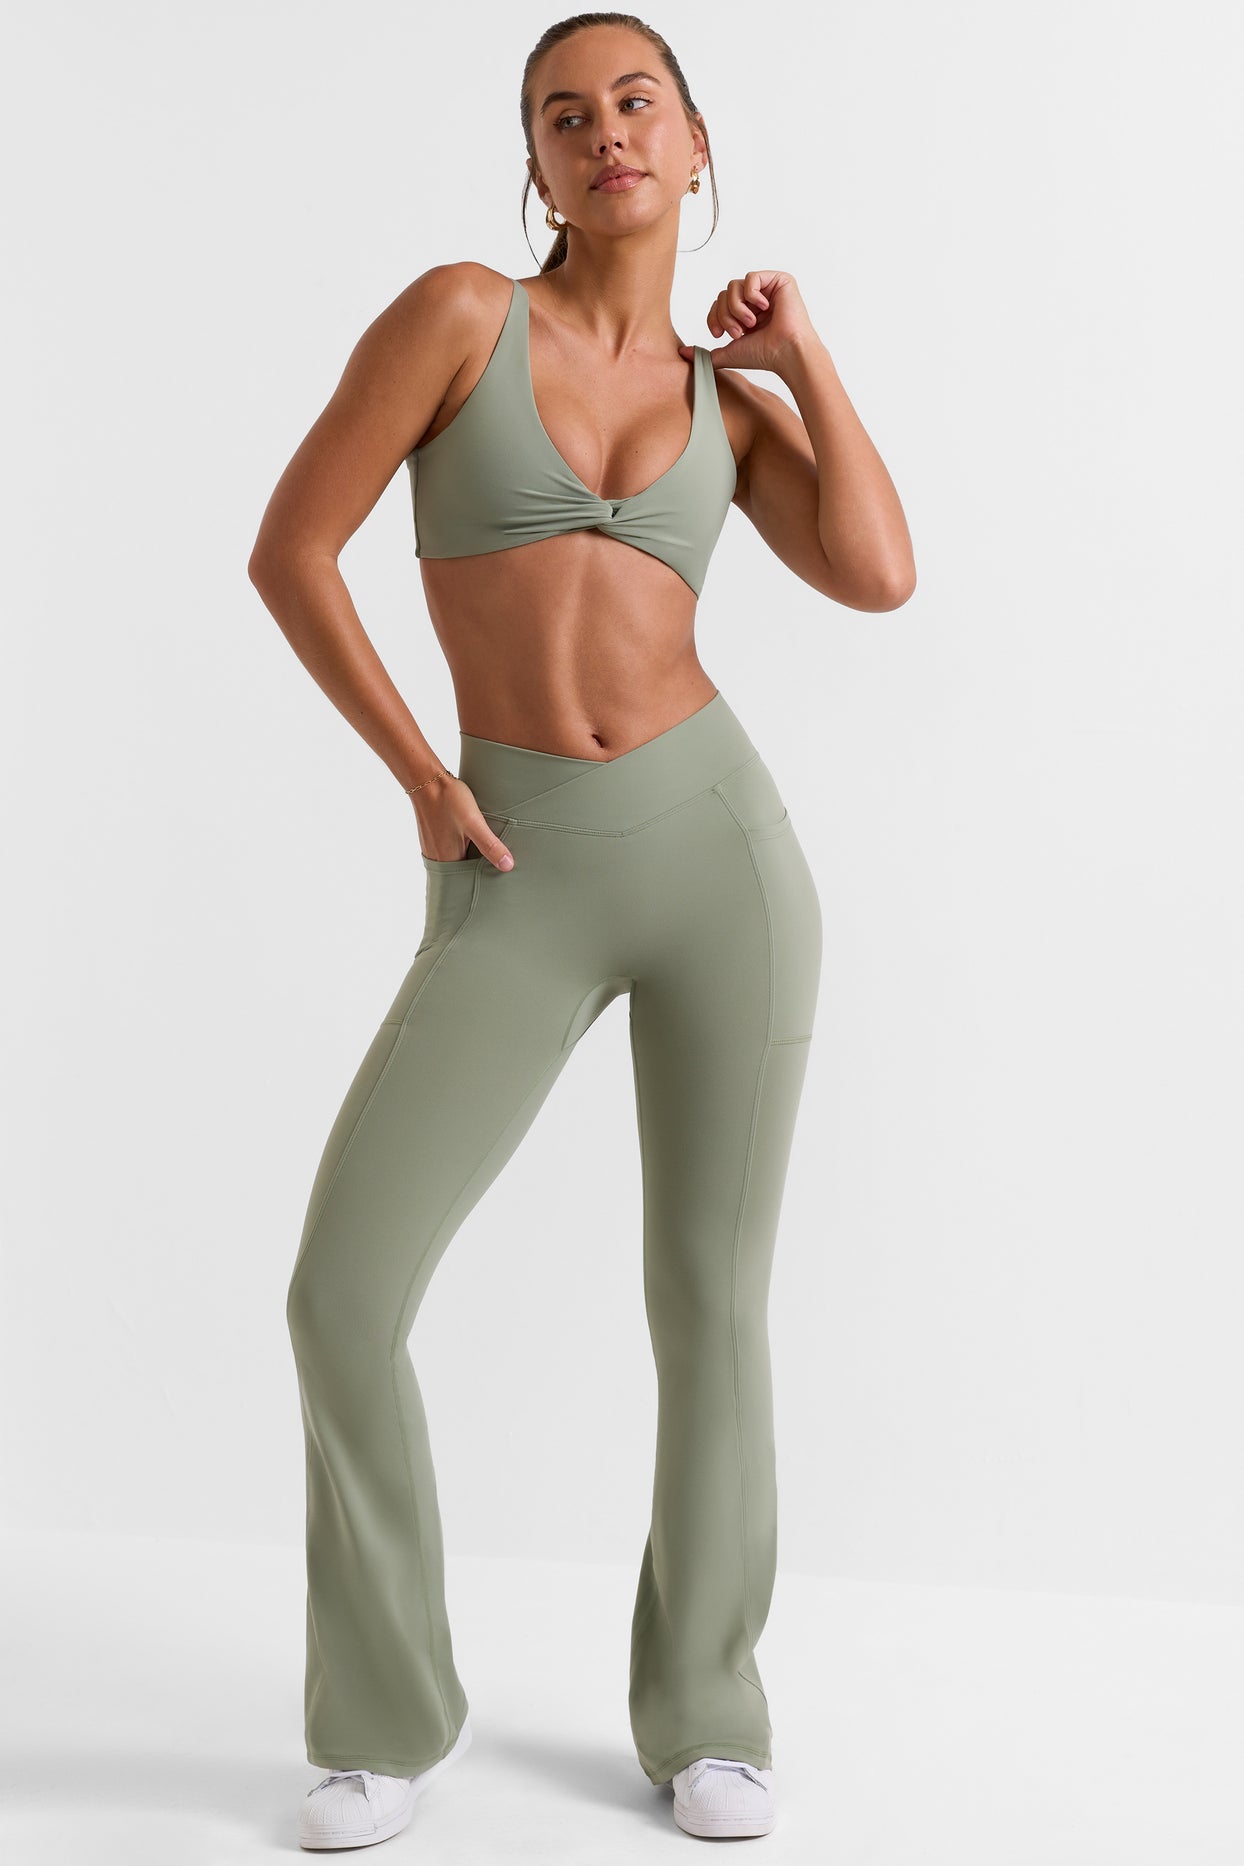 Sumner Crossover leggings with pockets - Peachy Brass